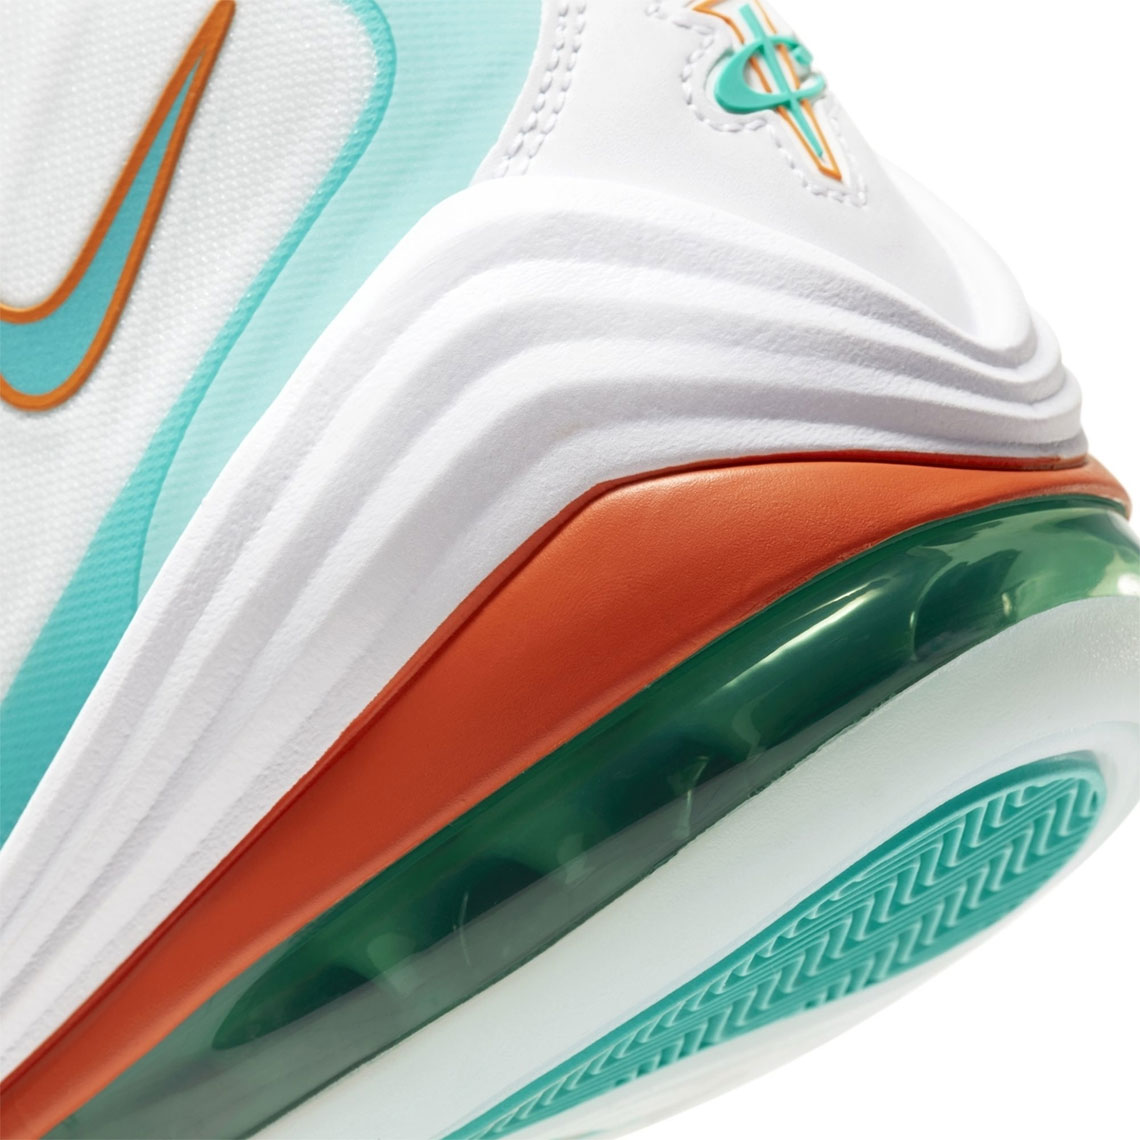 penny 5 dolphins